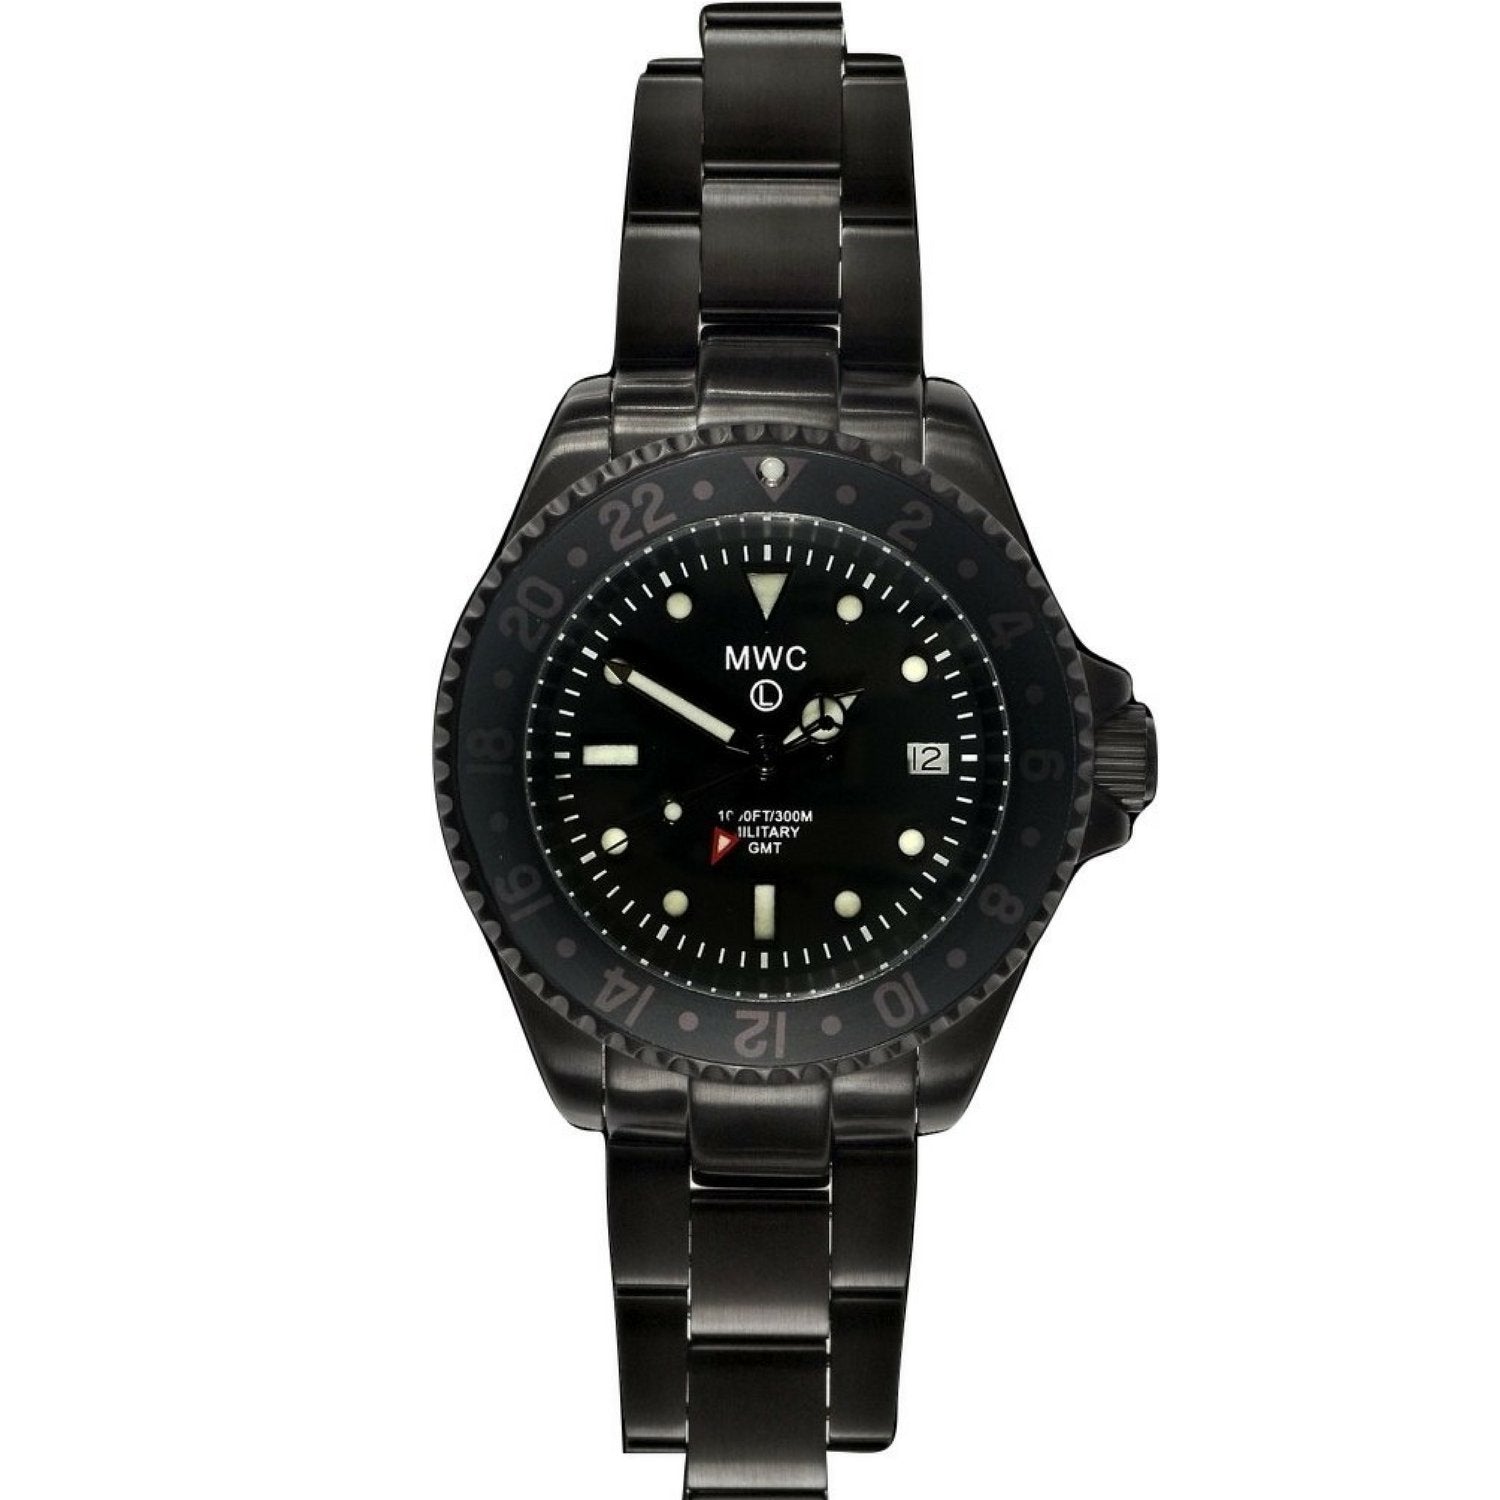 MWC GMT Dual Timezone Military Watch PVD With Bracelet